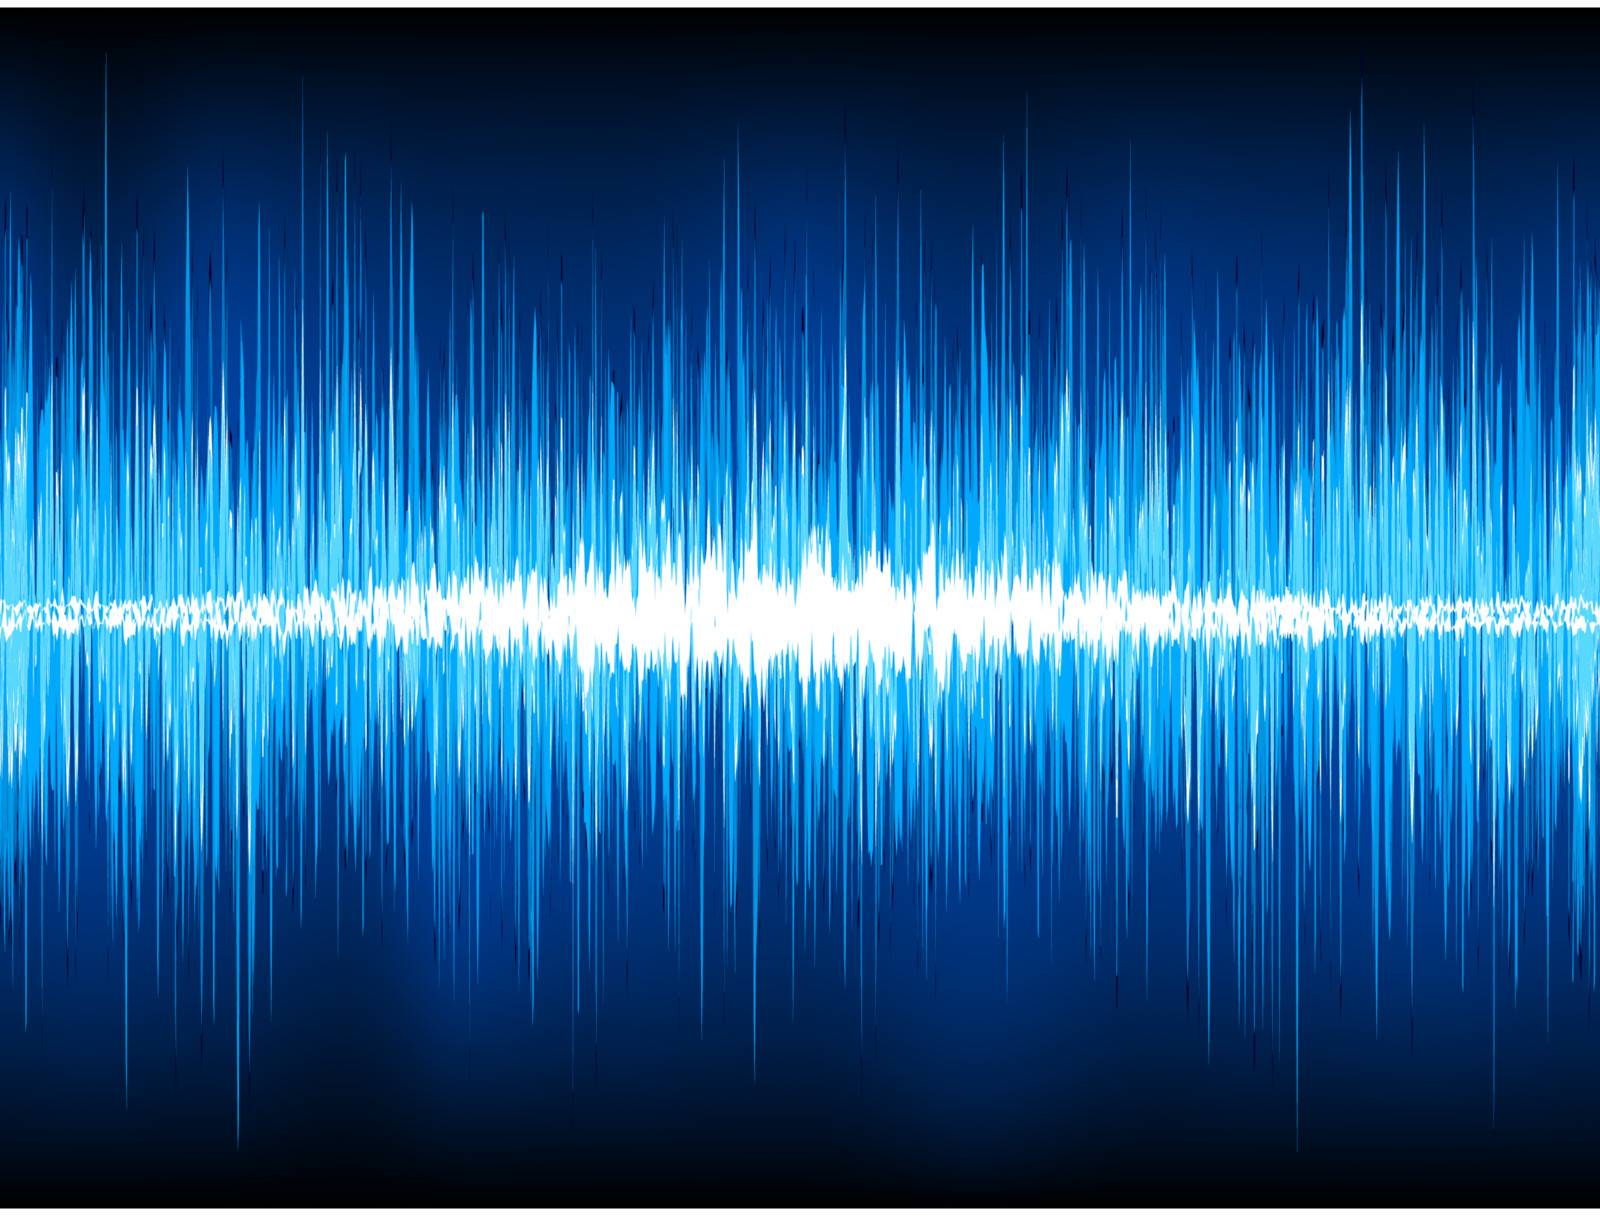 Sound waves oscillating on black background. EPS 8 vector file included